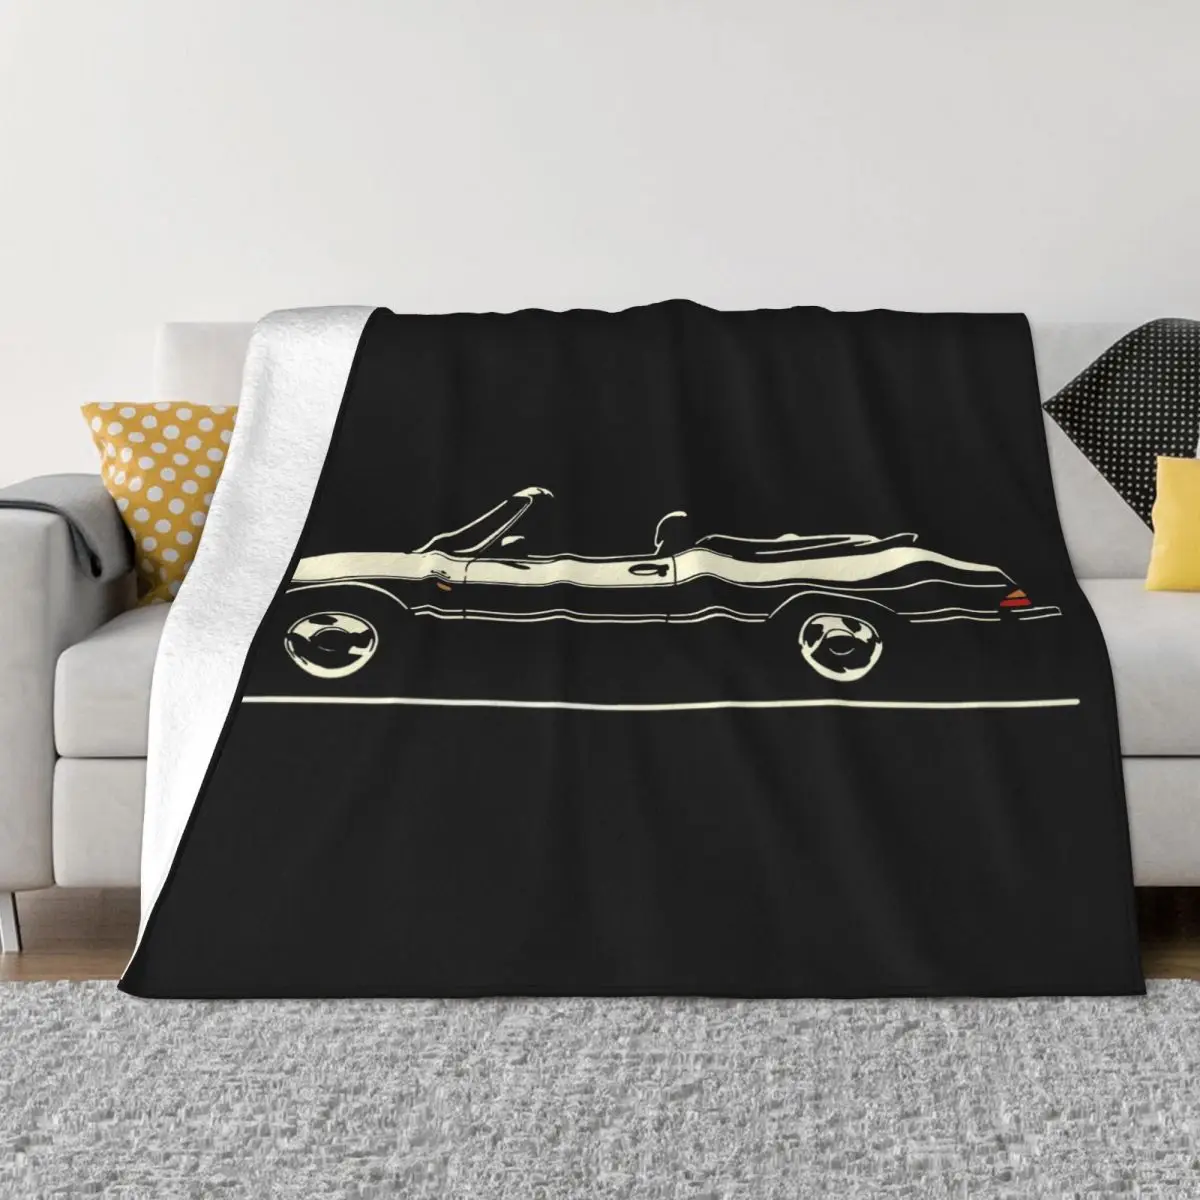 

For Saab 900 Convertible Fan Convertible Blanket Bed Cover Bed Quilt Anime Blanket Microfibers Washable Anti-pilling Non-stick